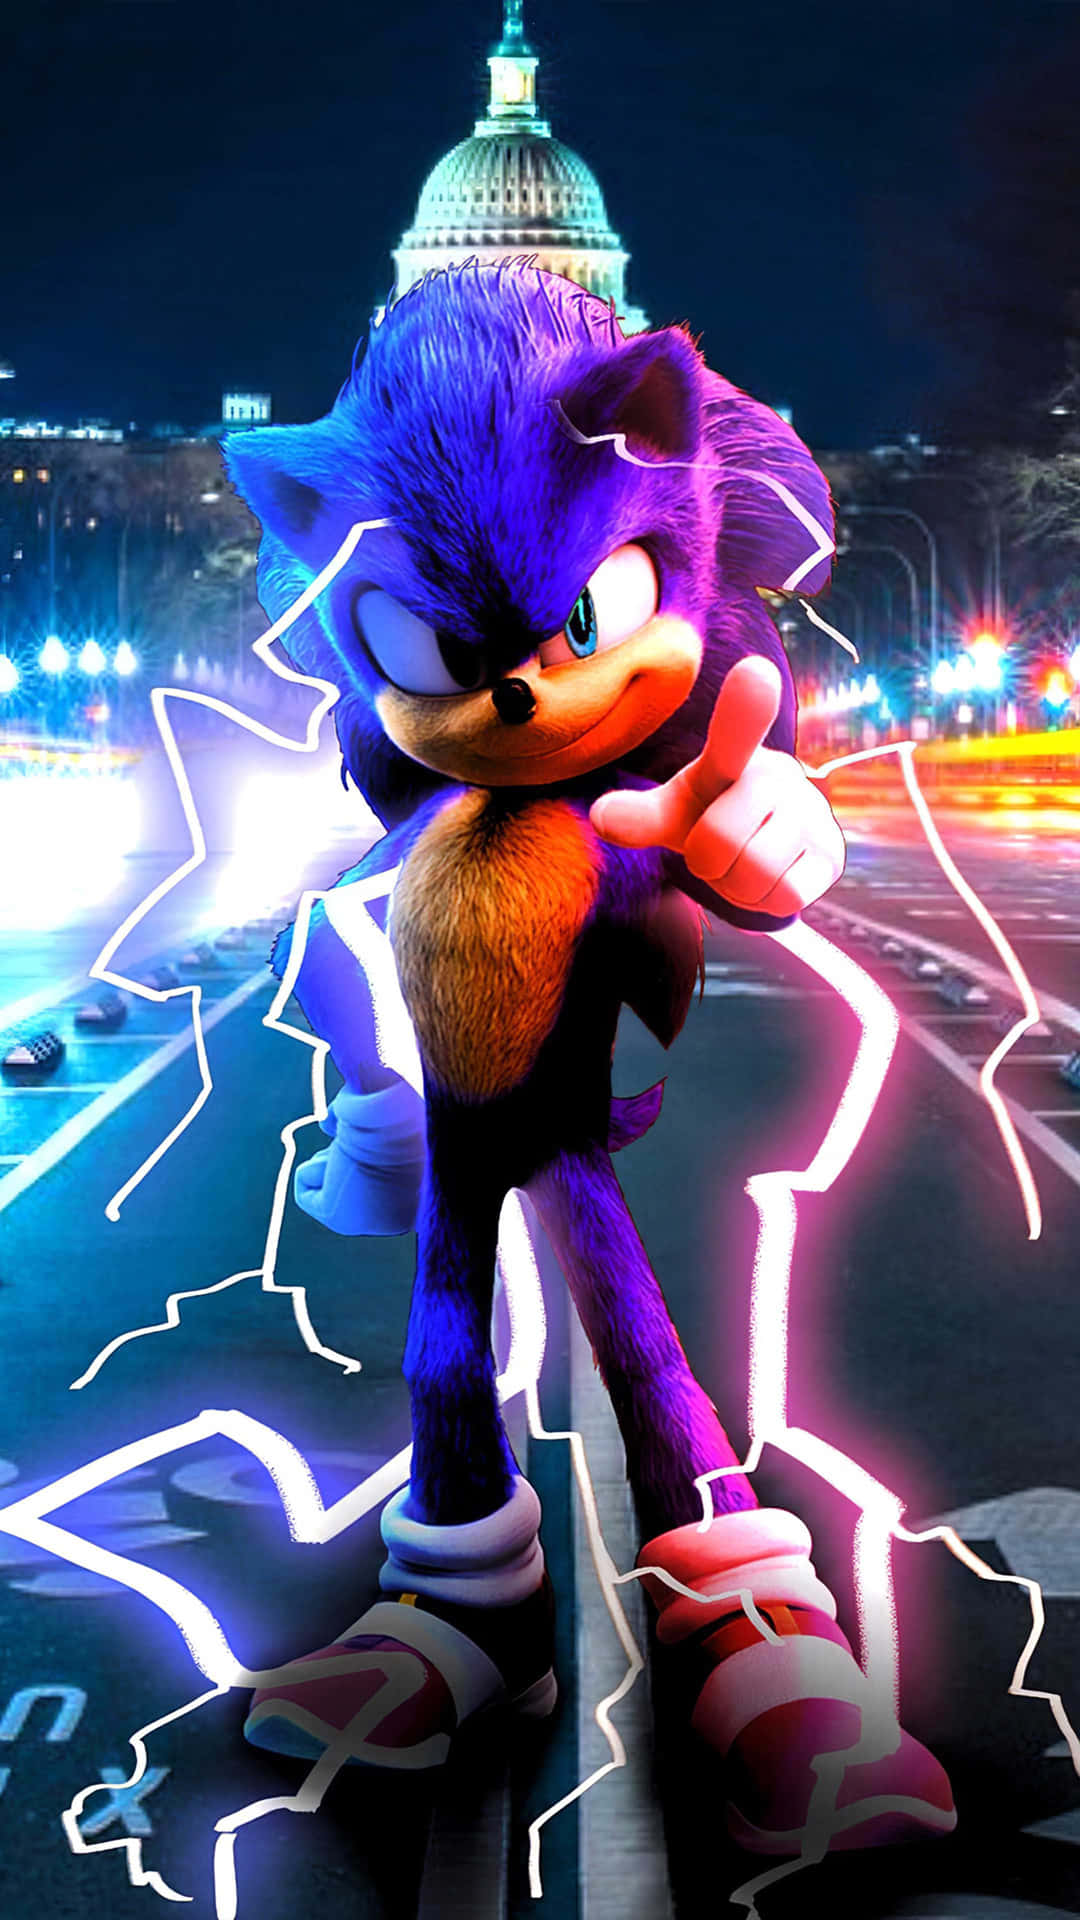 Go fast as Sonic!